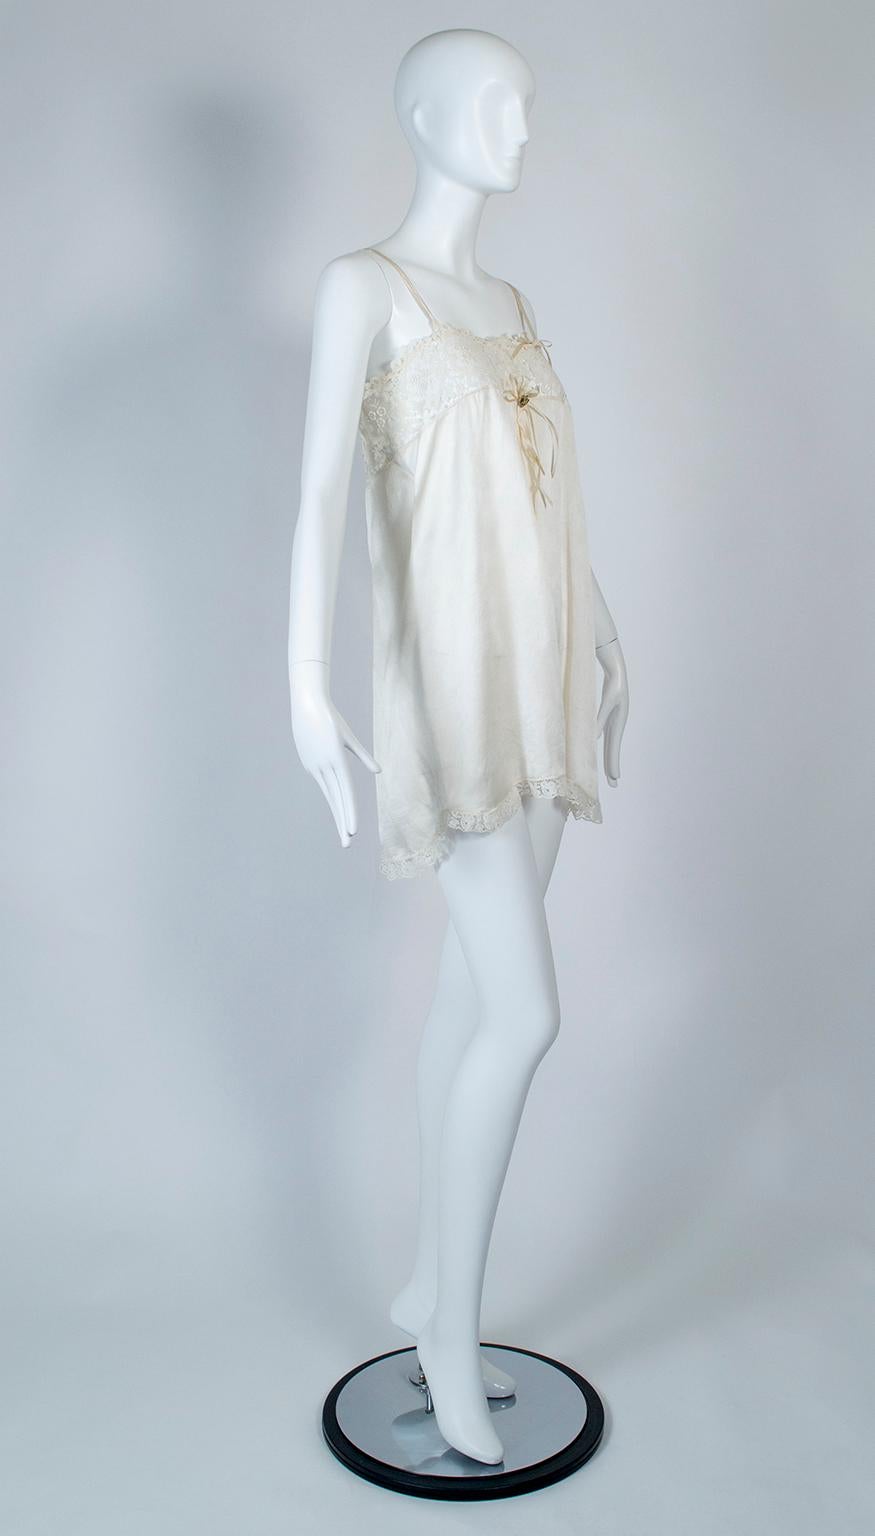 Part of a spectacular wedding trousseau, this alluring chemise features an inset lace chest threaded with a satin ribbon and ties at the left spaghetti strap. A small gold silk bouquet punctuates the center chest, flanked by loose ribbons that draw